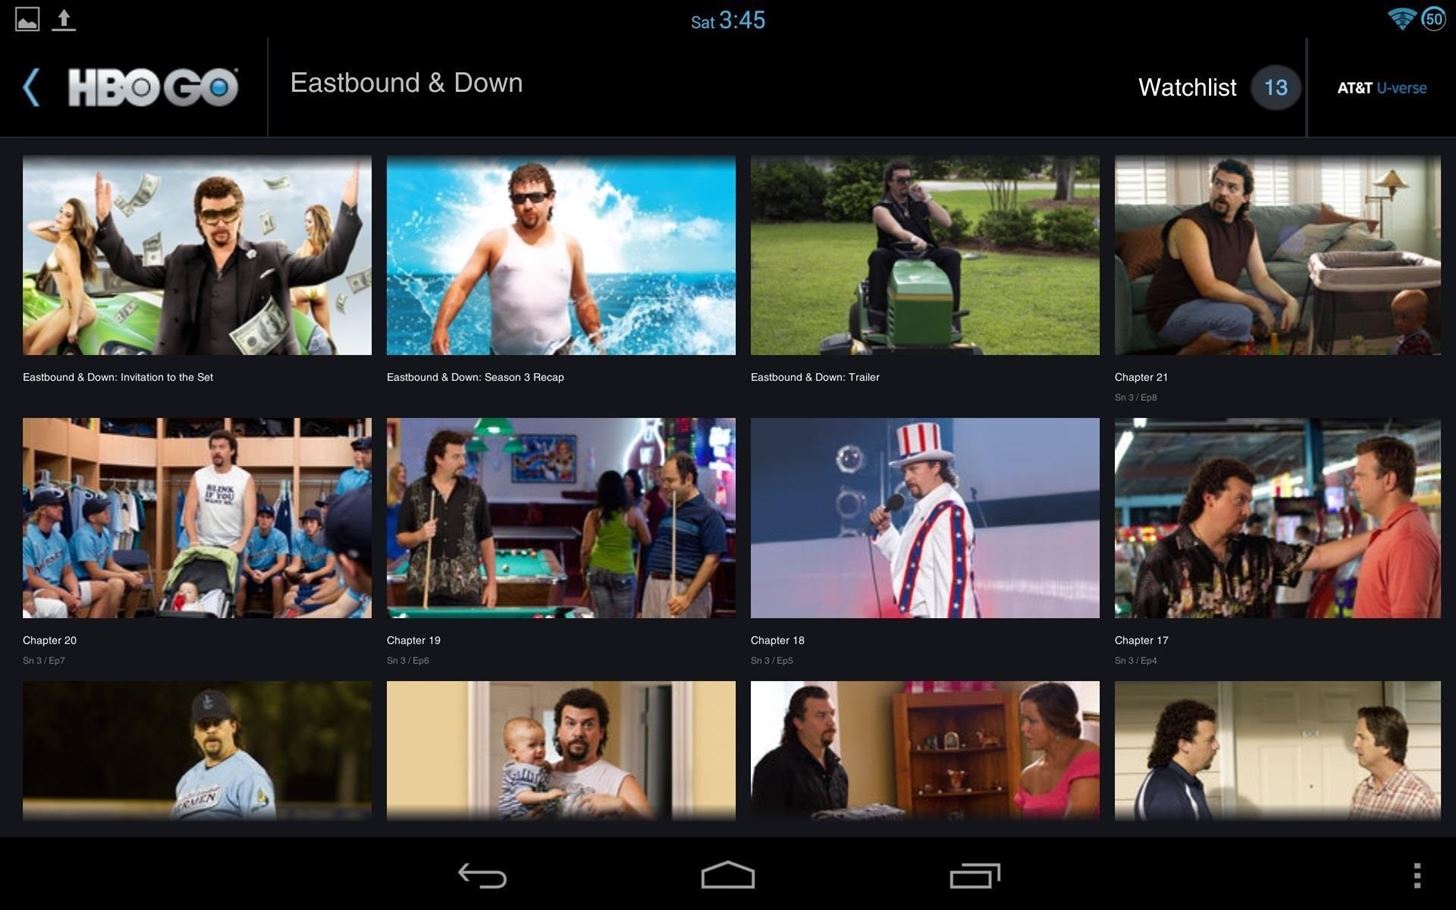 How to Install the HBO GO App on Your Nexus 7 Tablet (No Root Required)